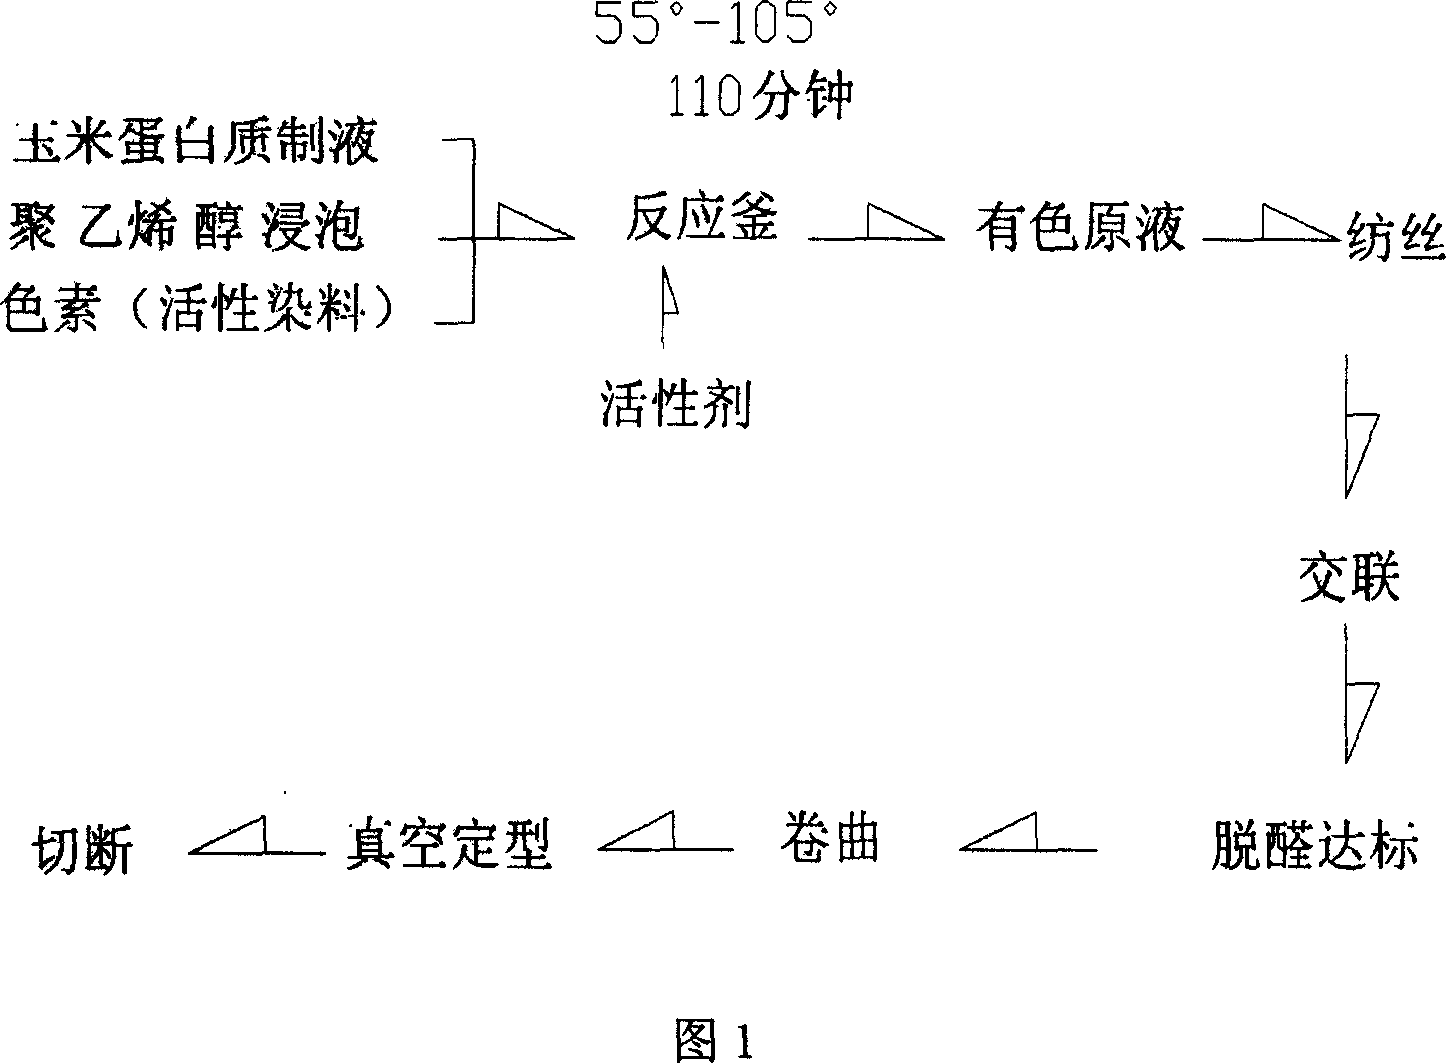 Maize protein colored textile fiber and method for producing same